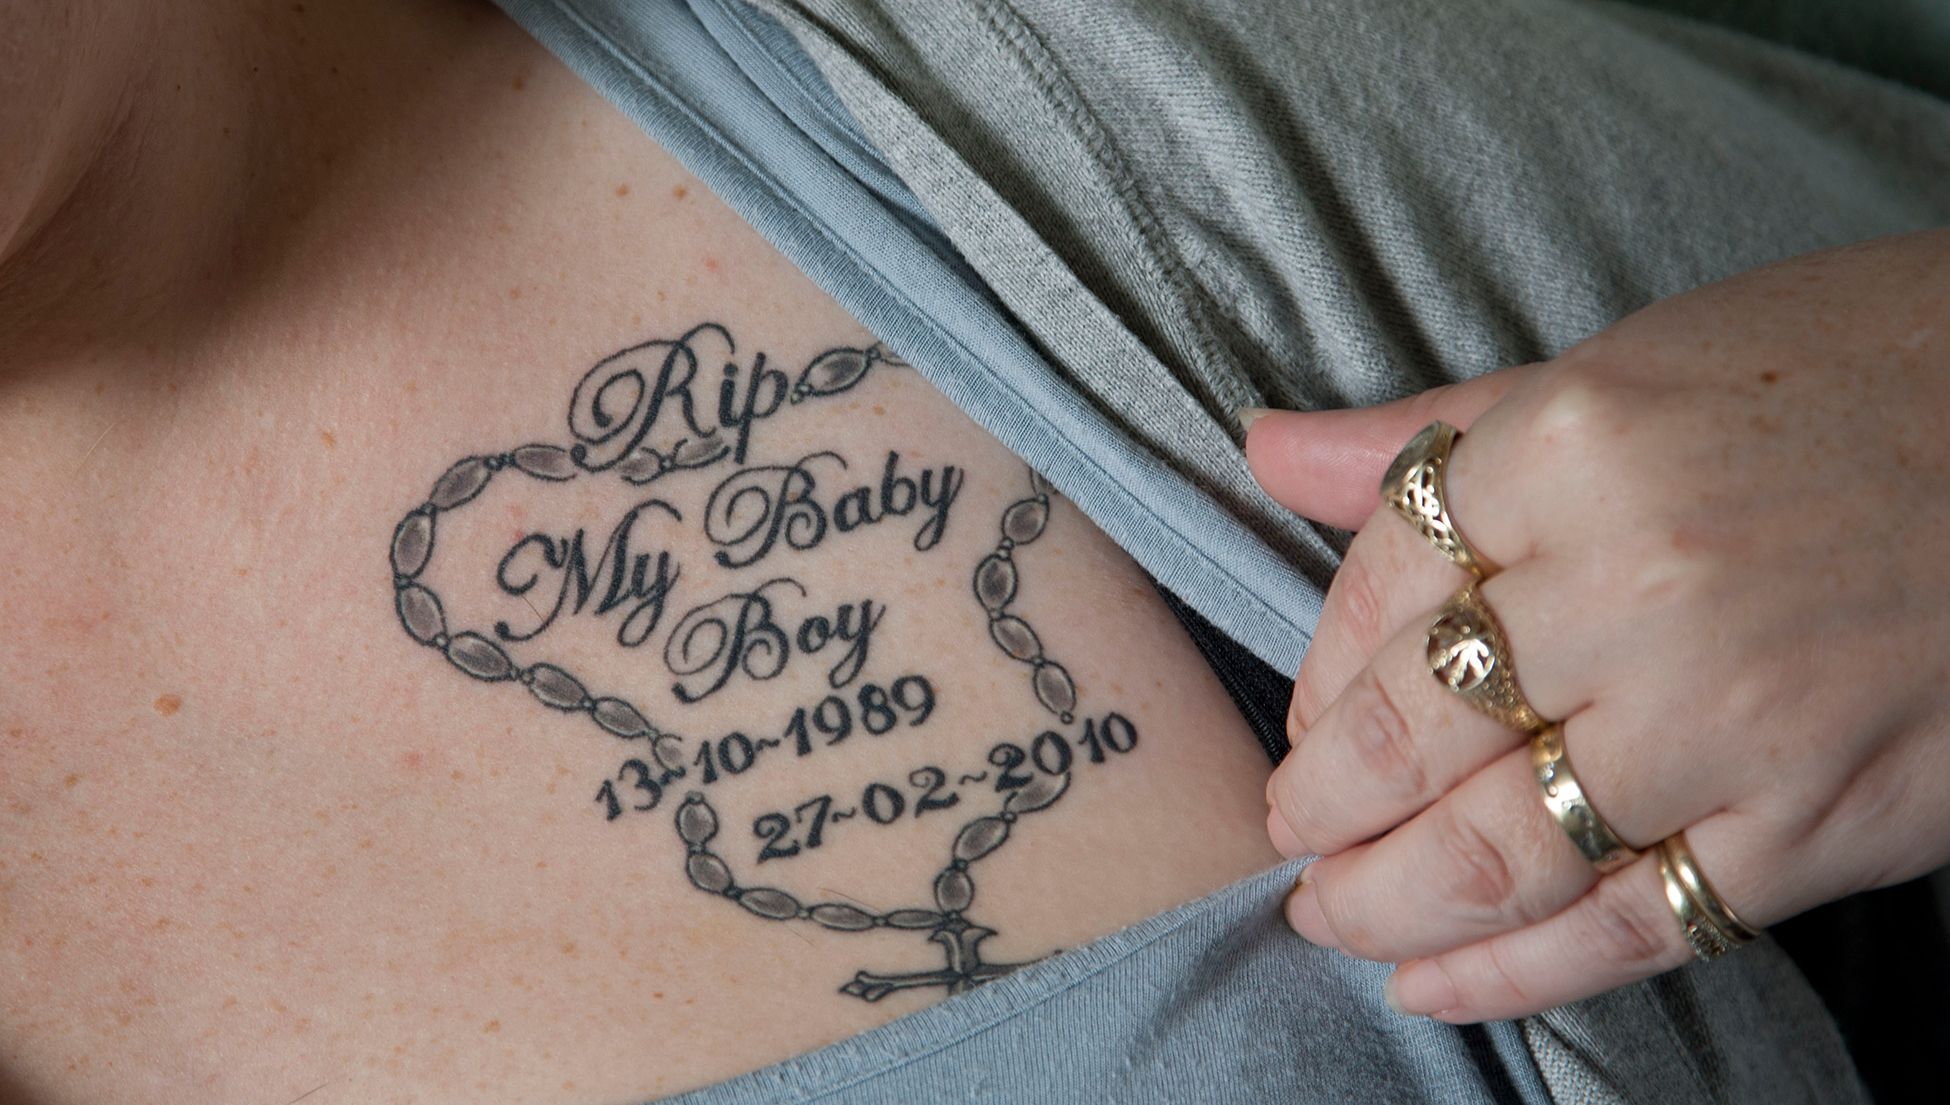 A tattoo is for life': how memorial tattoos help the bereaved | Psyche Ideas